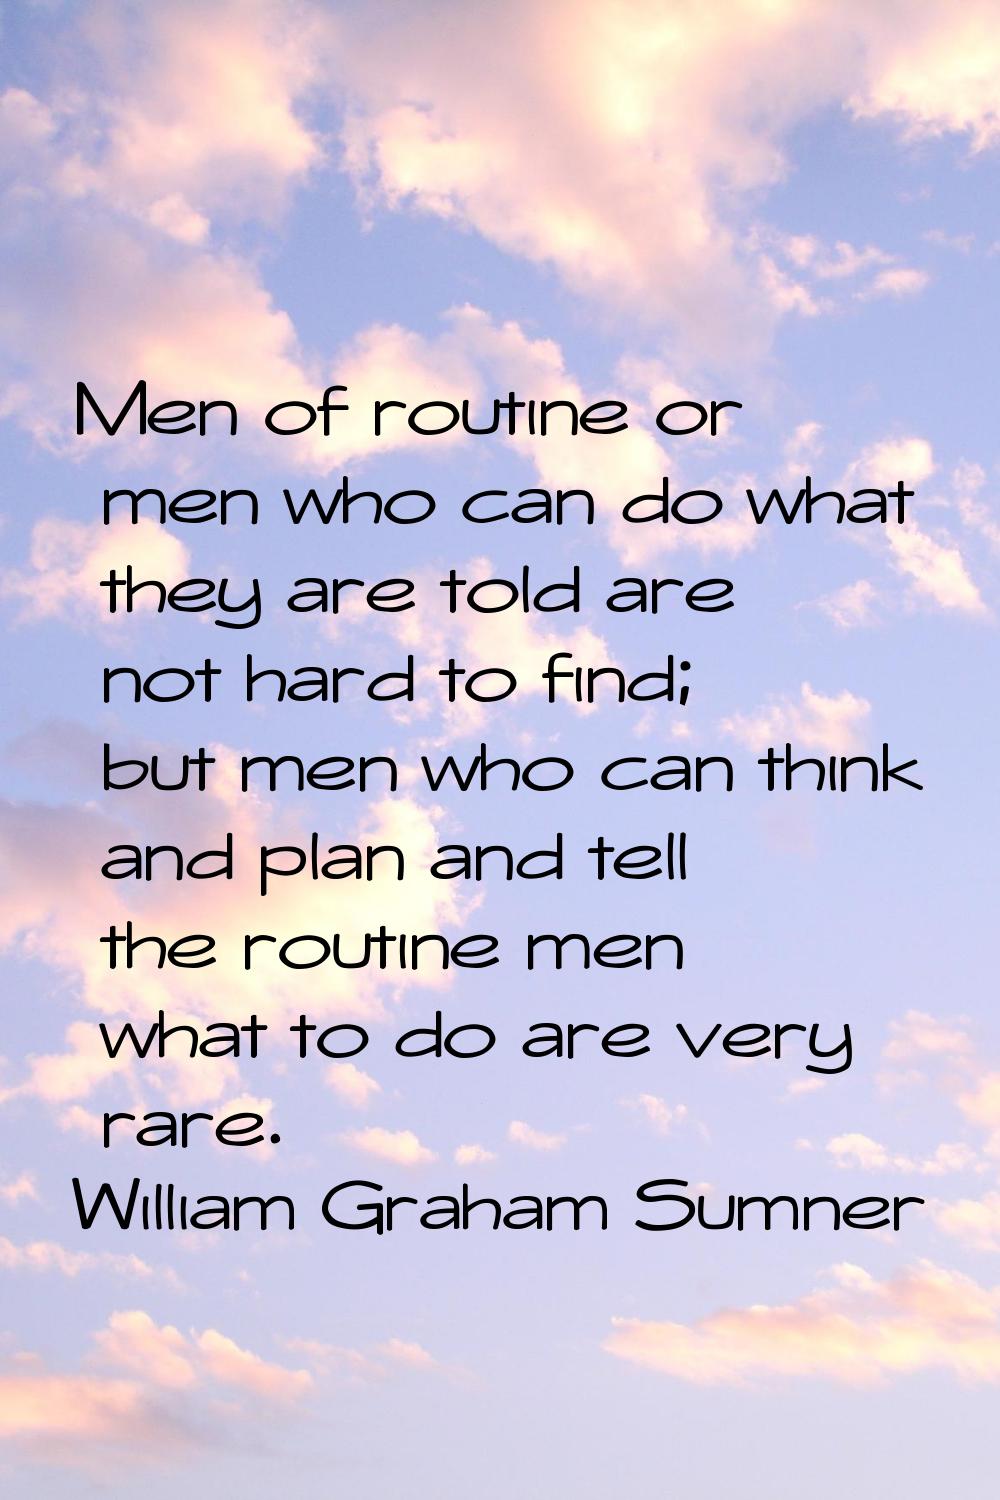 Men of routine or men who can do what they are told are not hard to find; but men who can think and